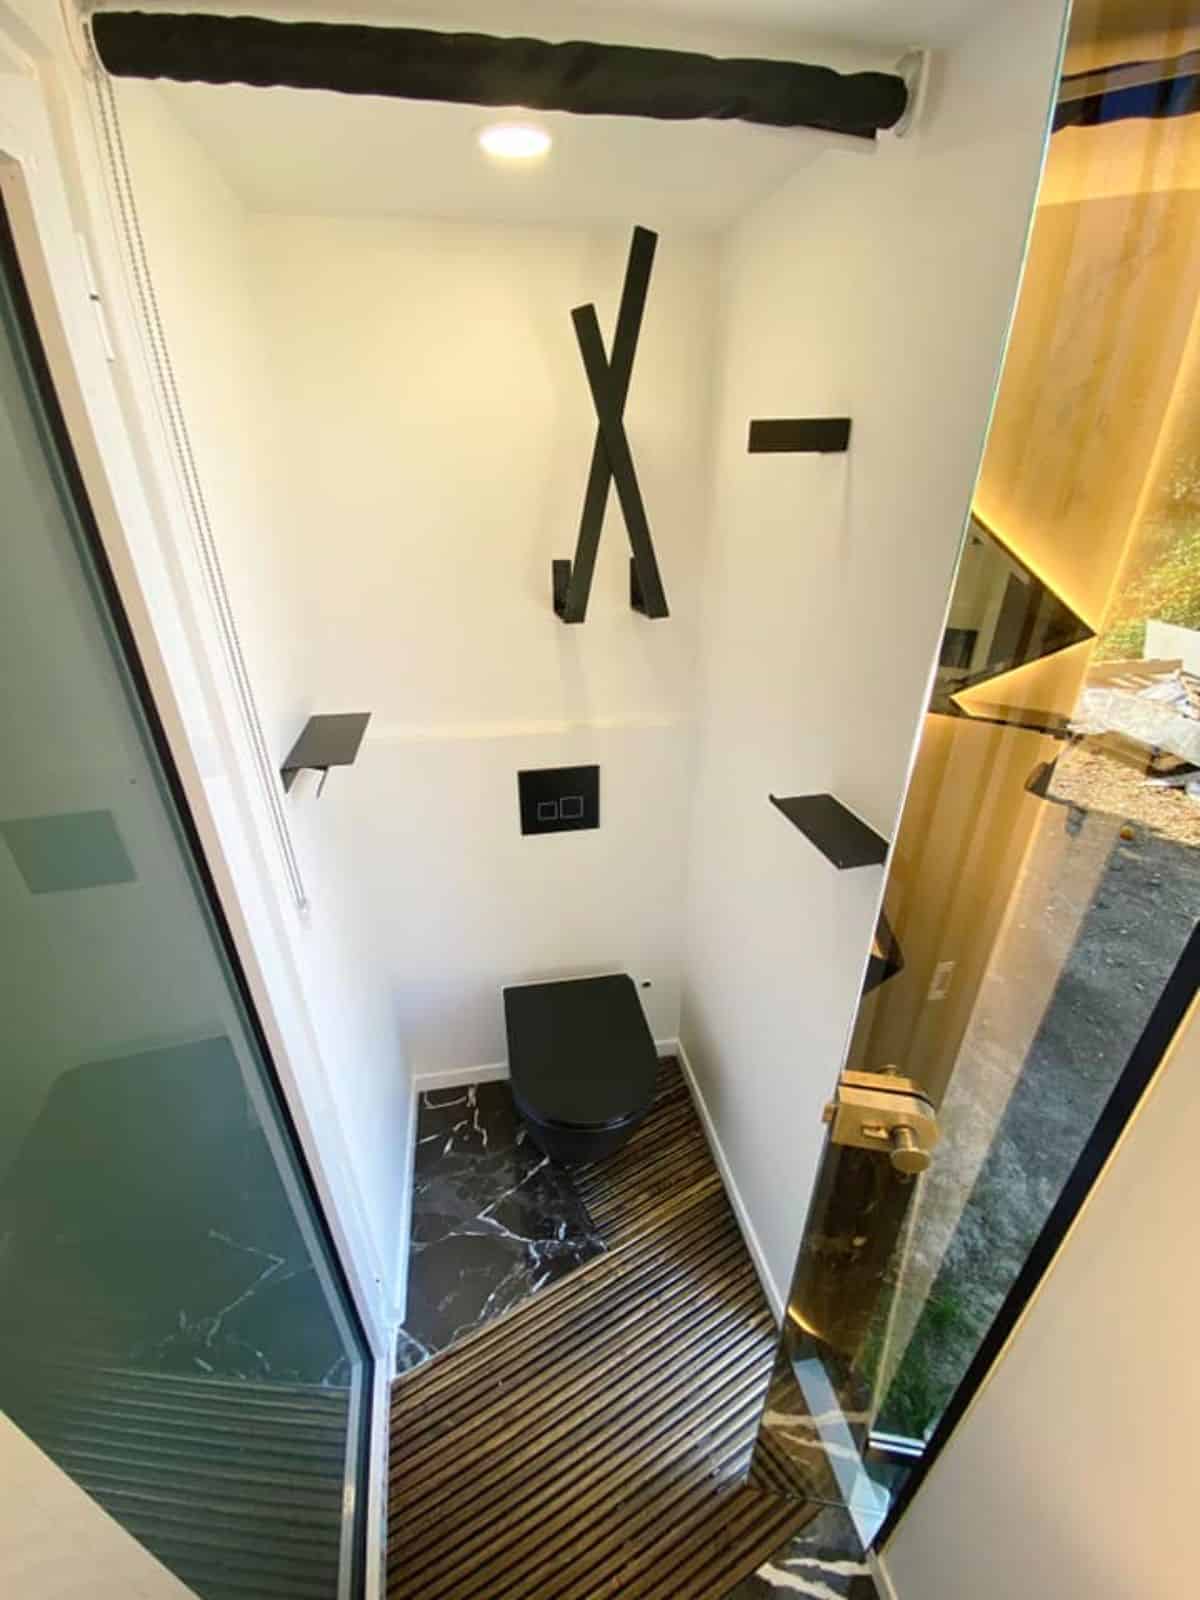 standard toilet installed in bathroom of micro mansion home